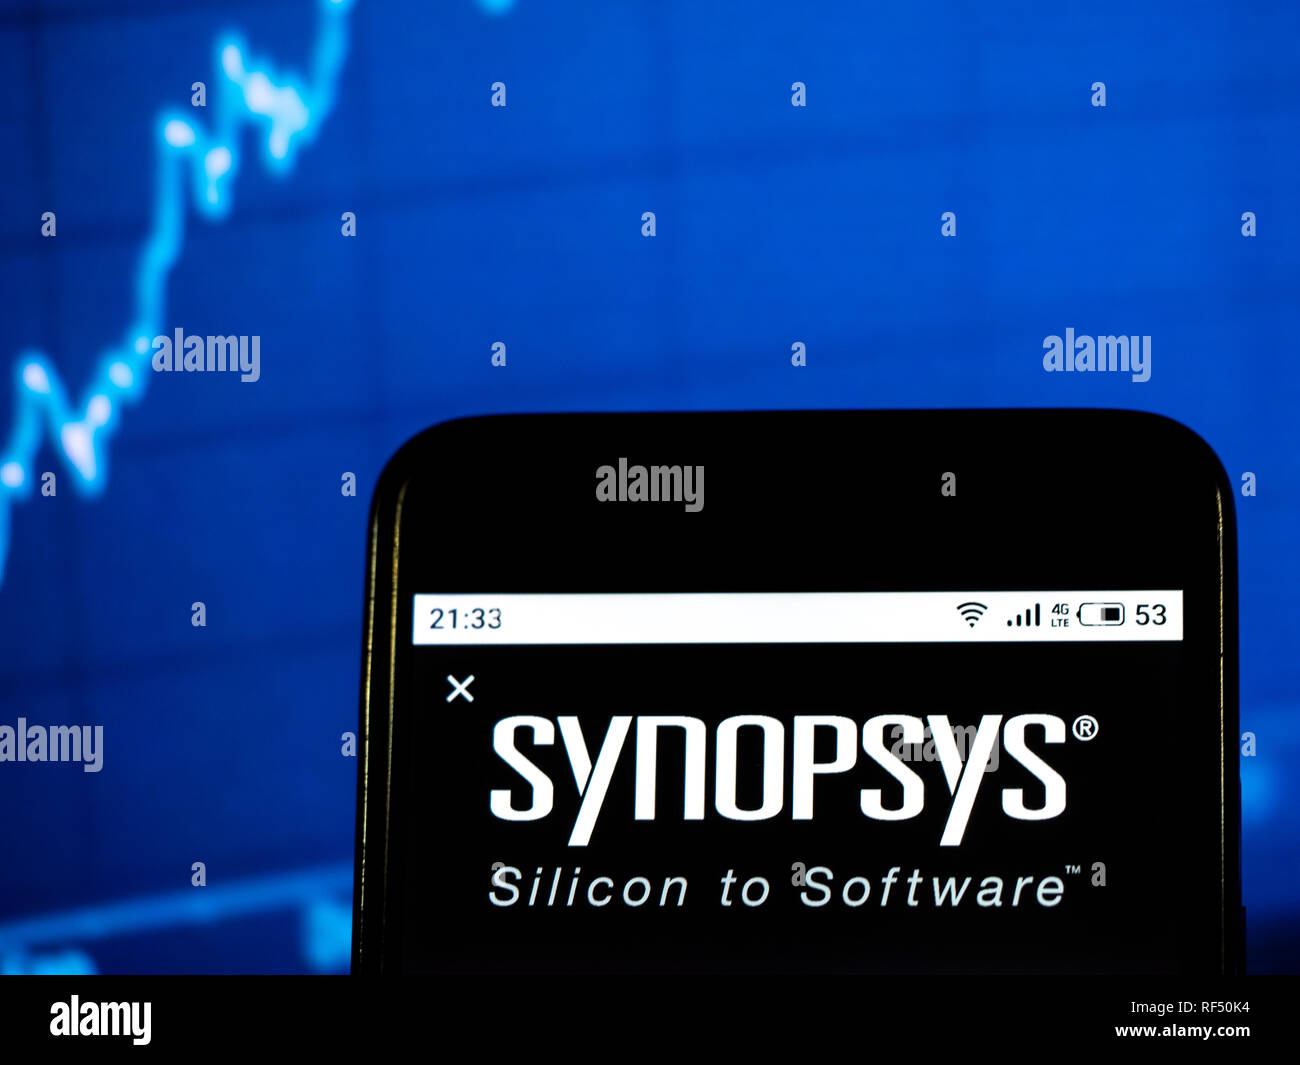 synopsys phone number